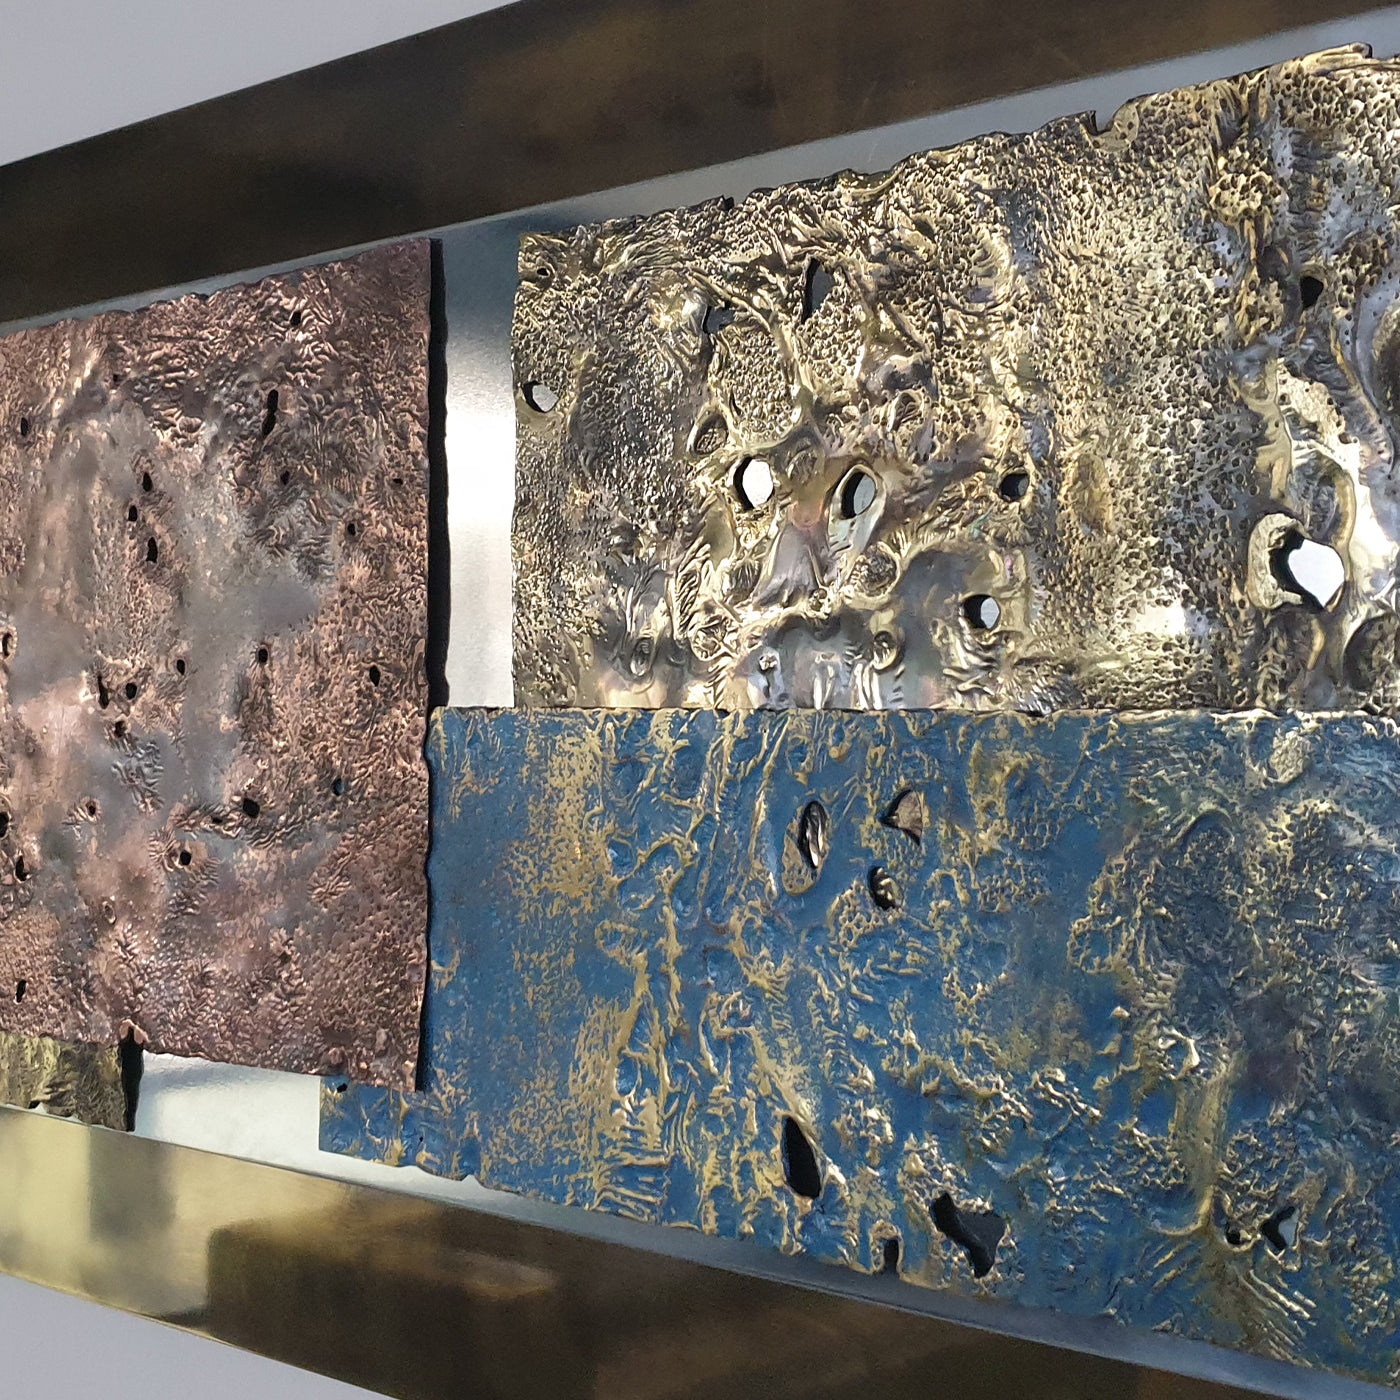 Autunno Metal Wall Sculpture by Davide Foletti - Alternative view 3